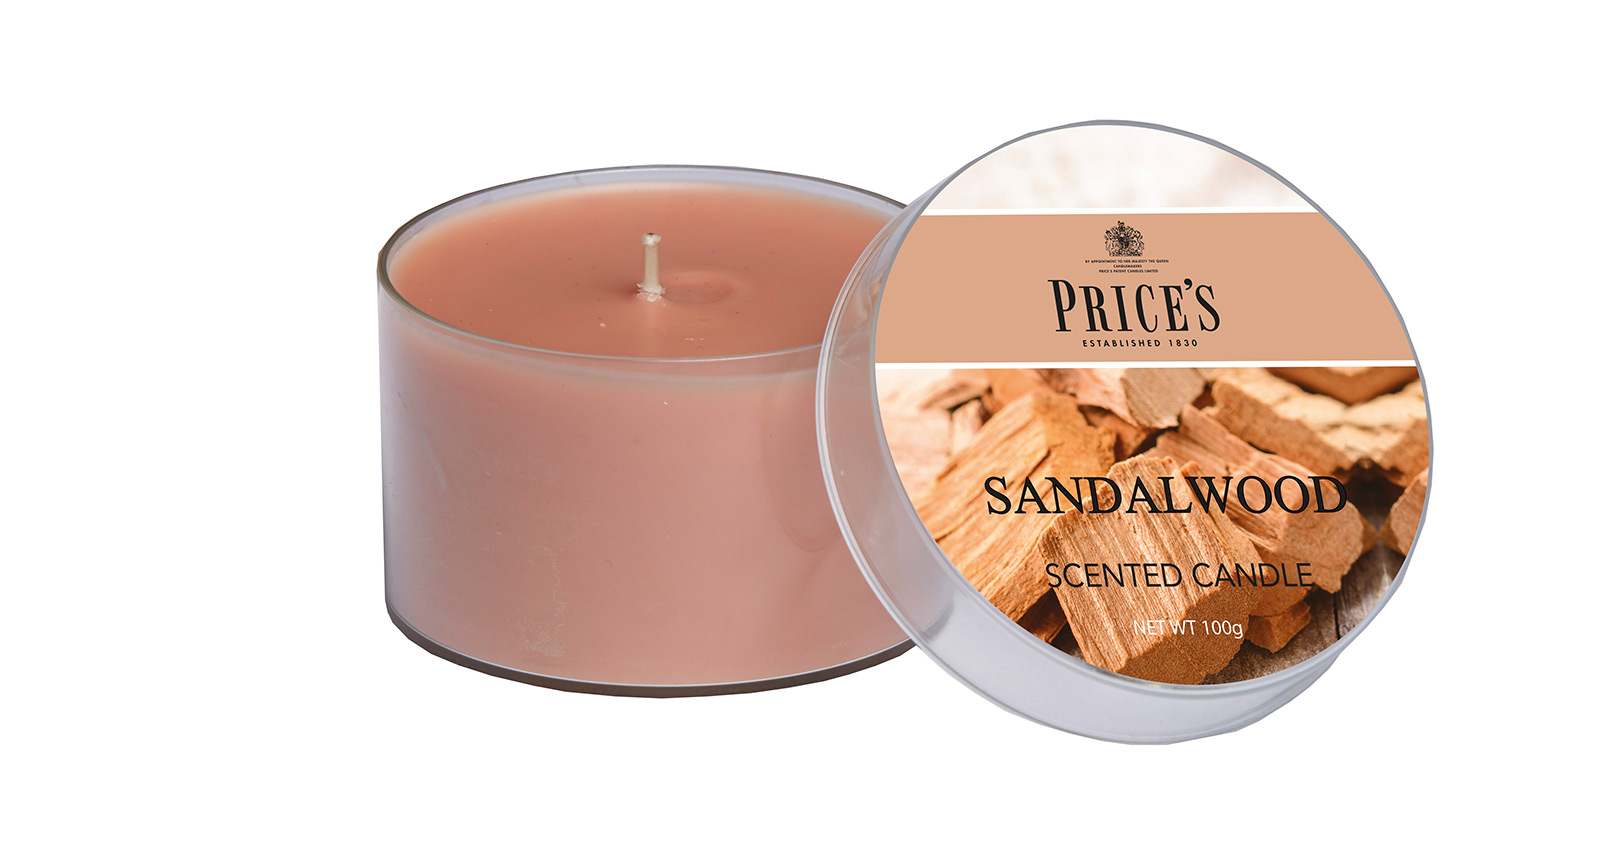 Prices Candle "Sandalwood" 100g    